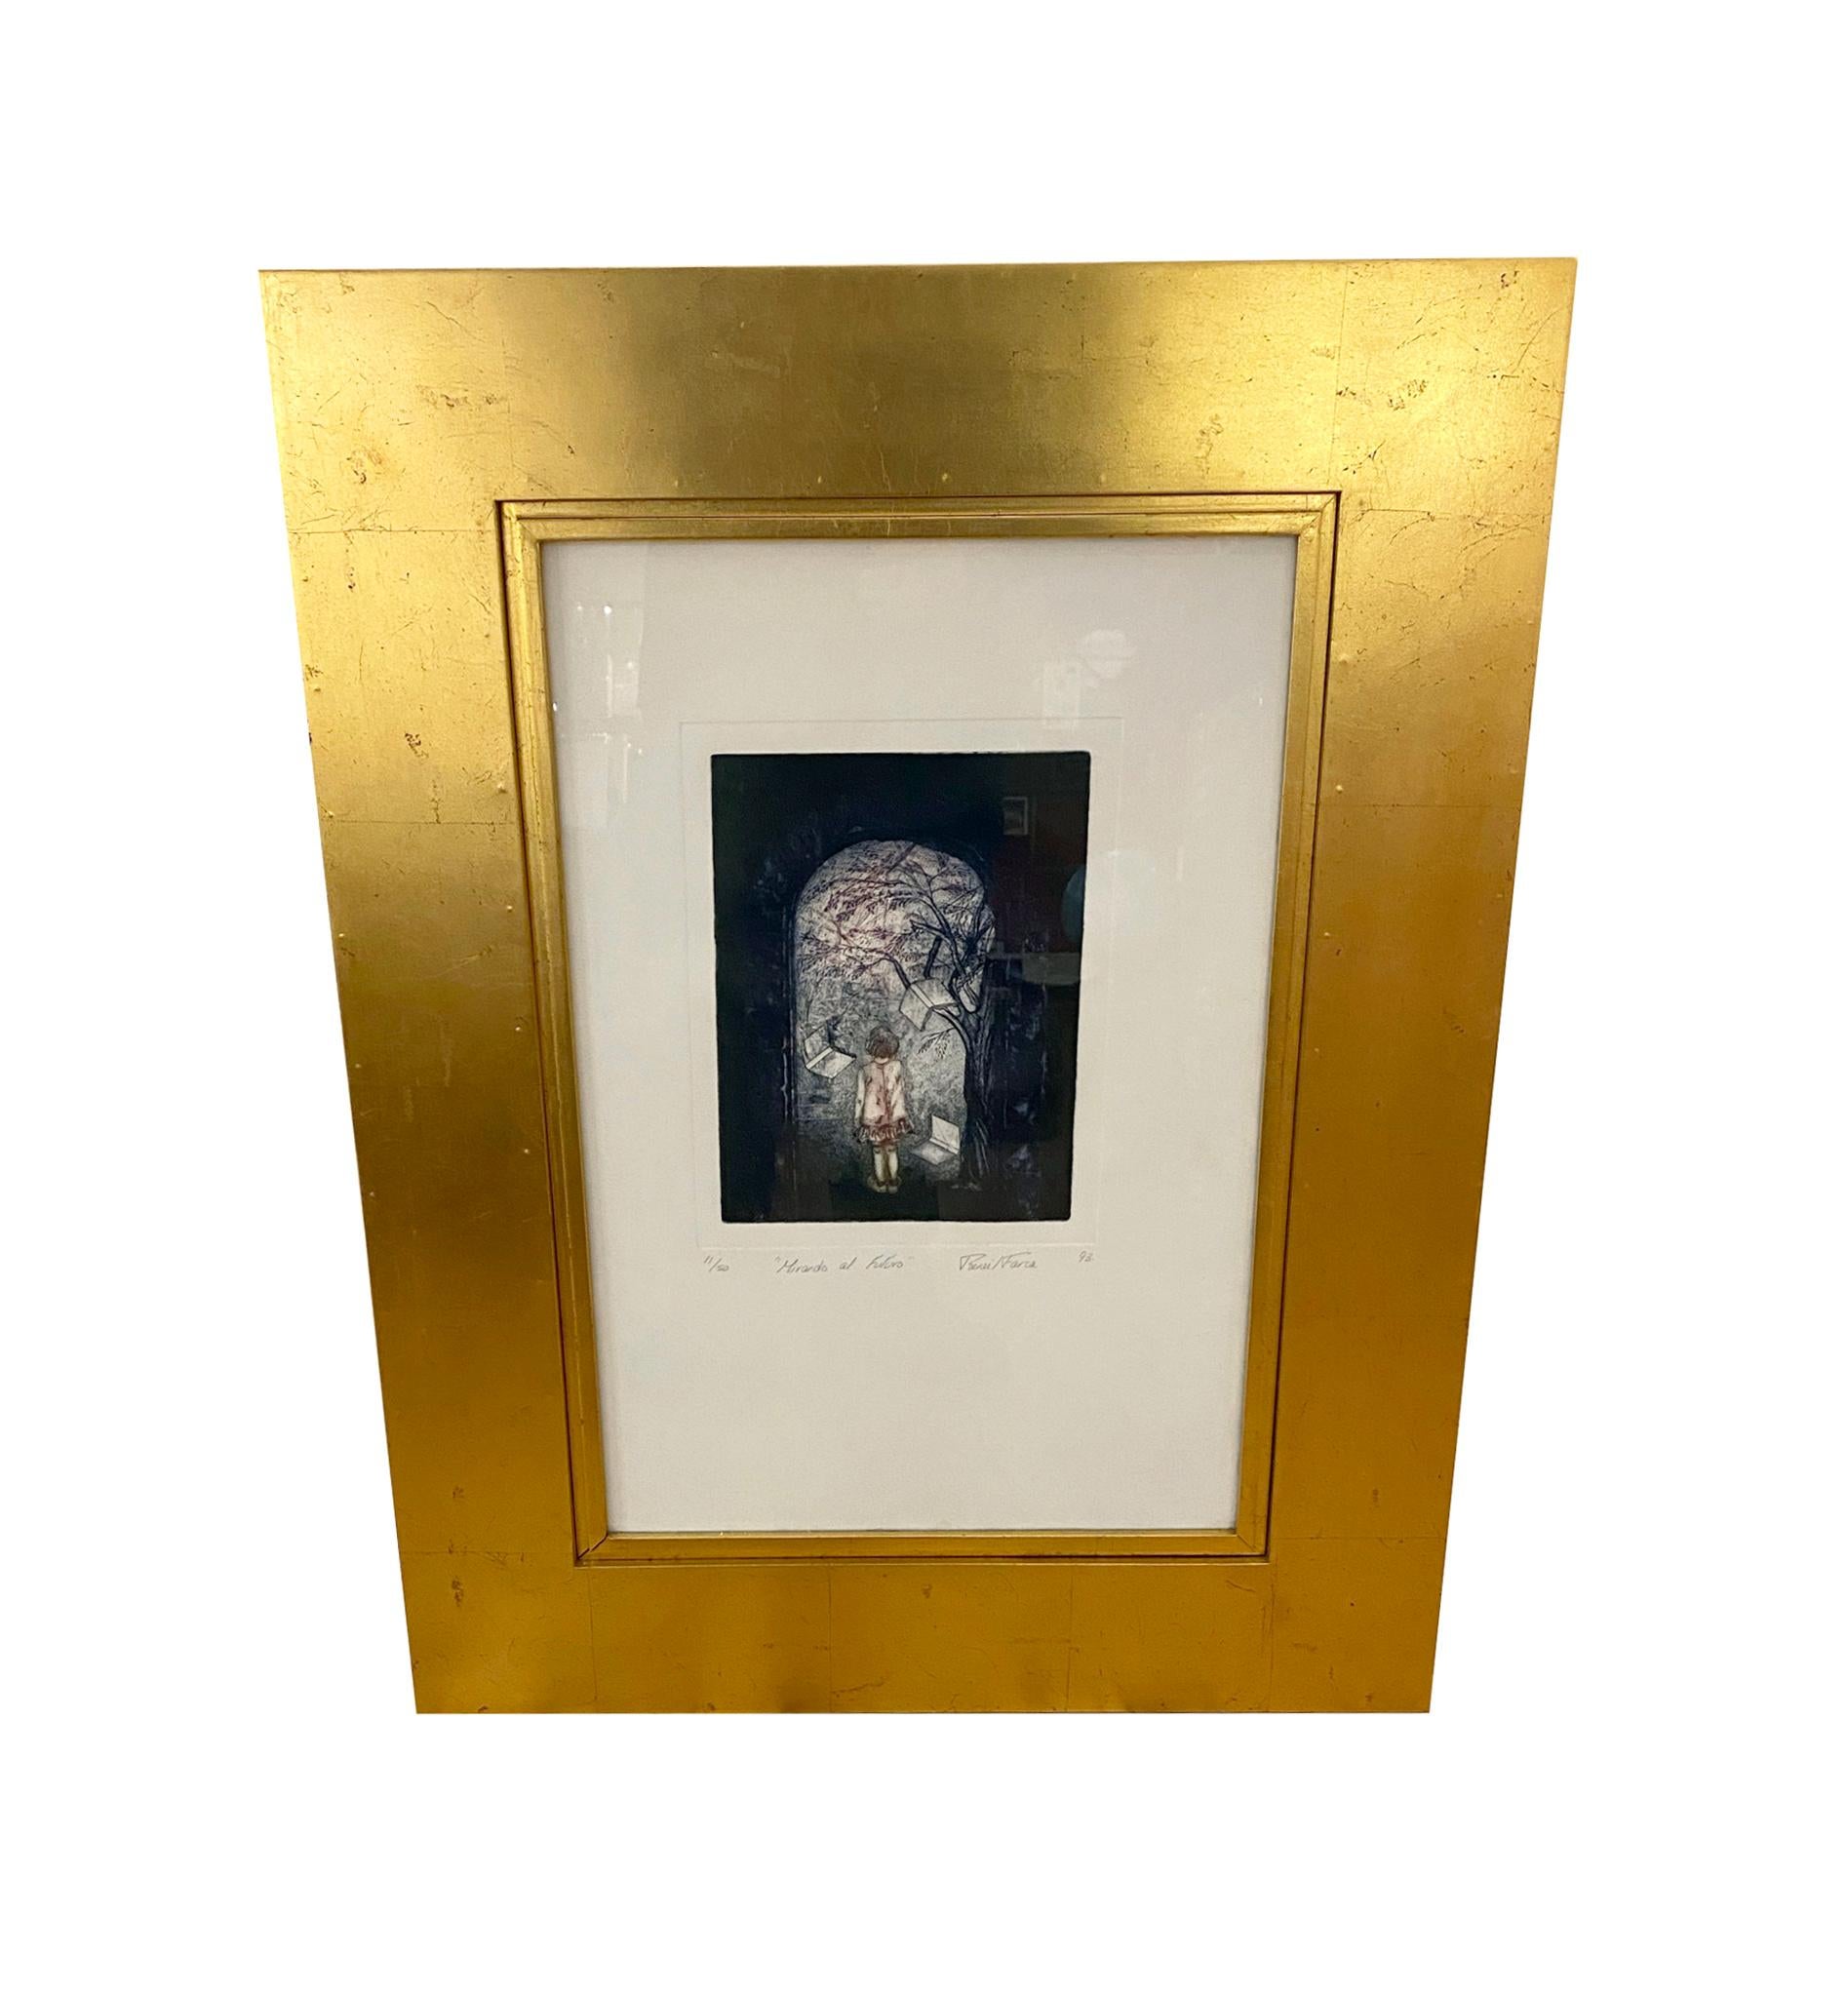 Gilded wood framed Mirando Alfuturo 'Looking into the Future' by Renee Farca, an artist from Mexico. This print is number 11/50. Made in 1993. Please note, this item is located in one of our NYC locations.